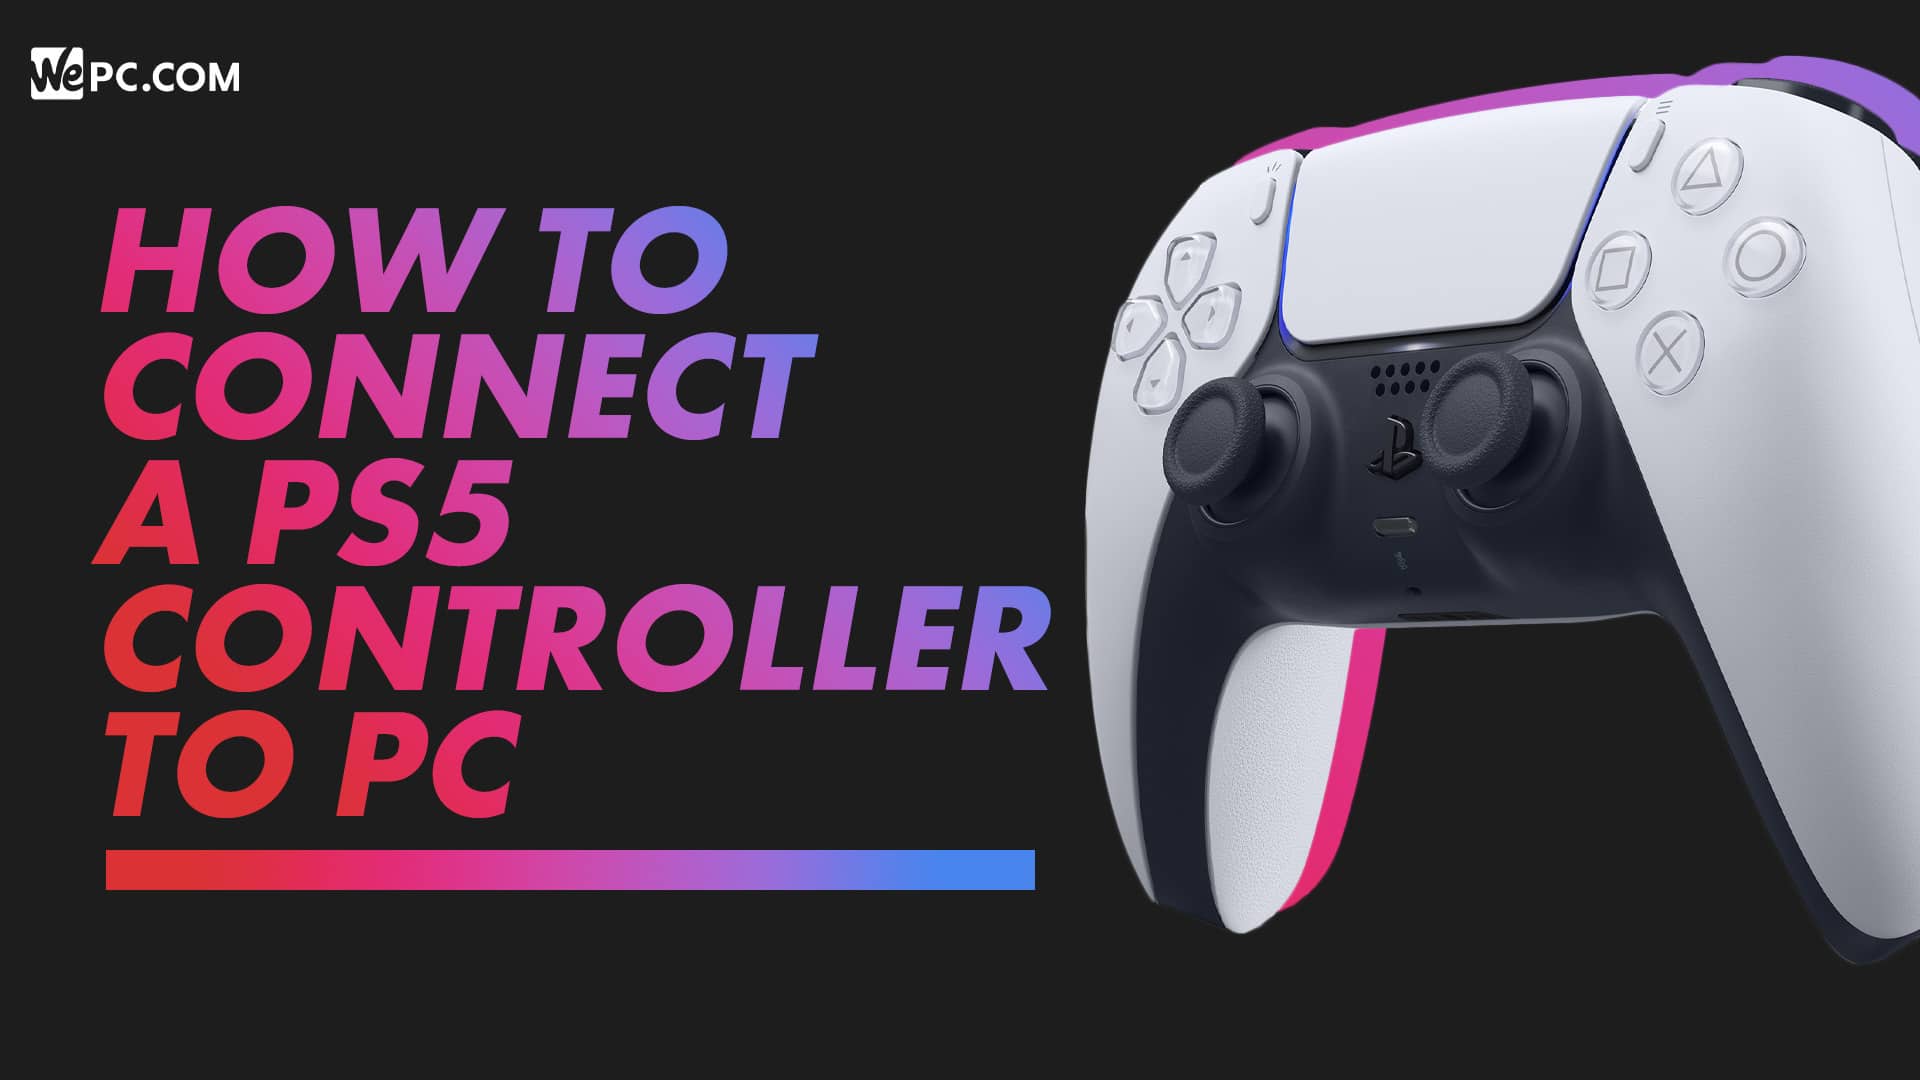 How to pair a PS5 controller